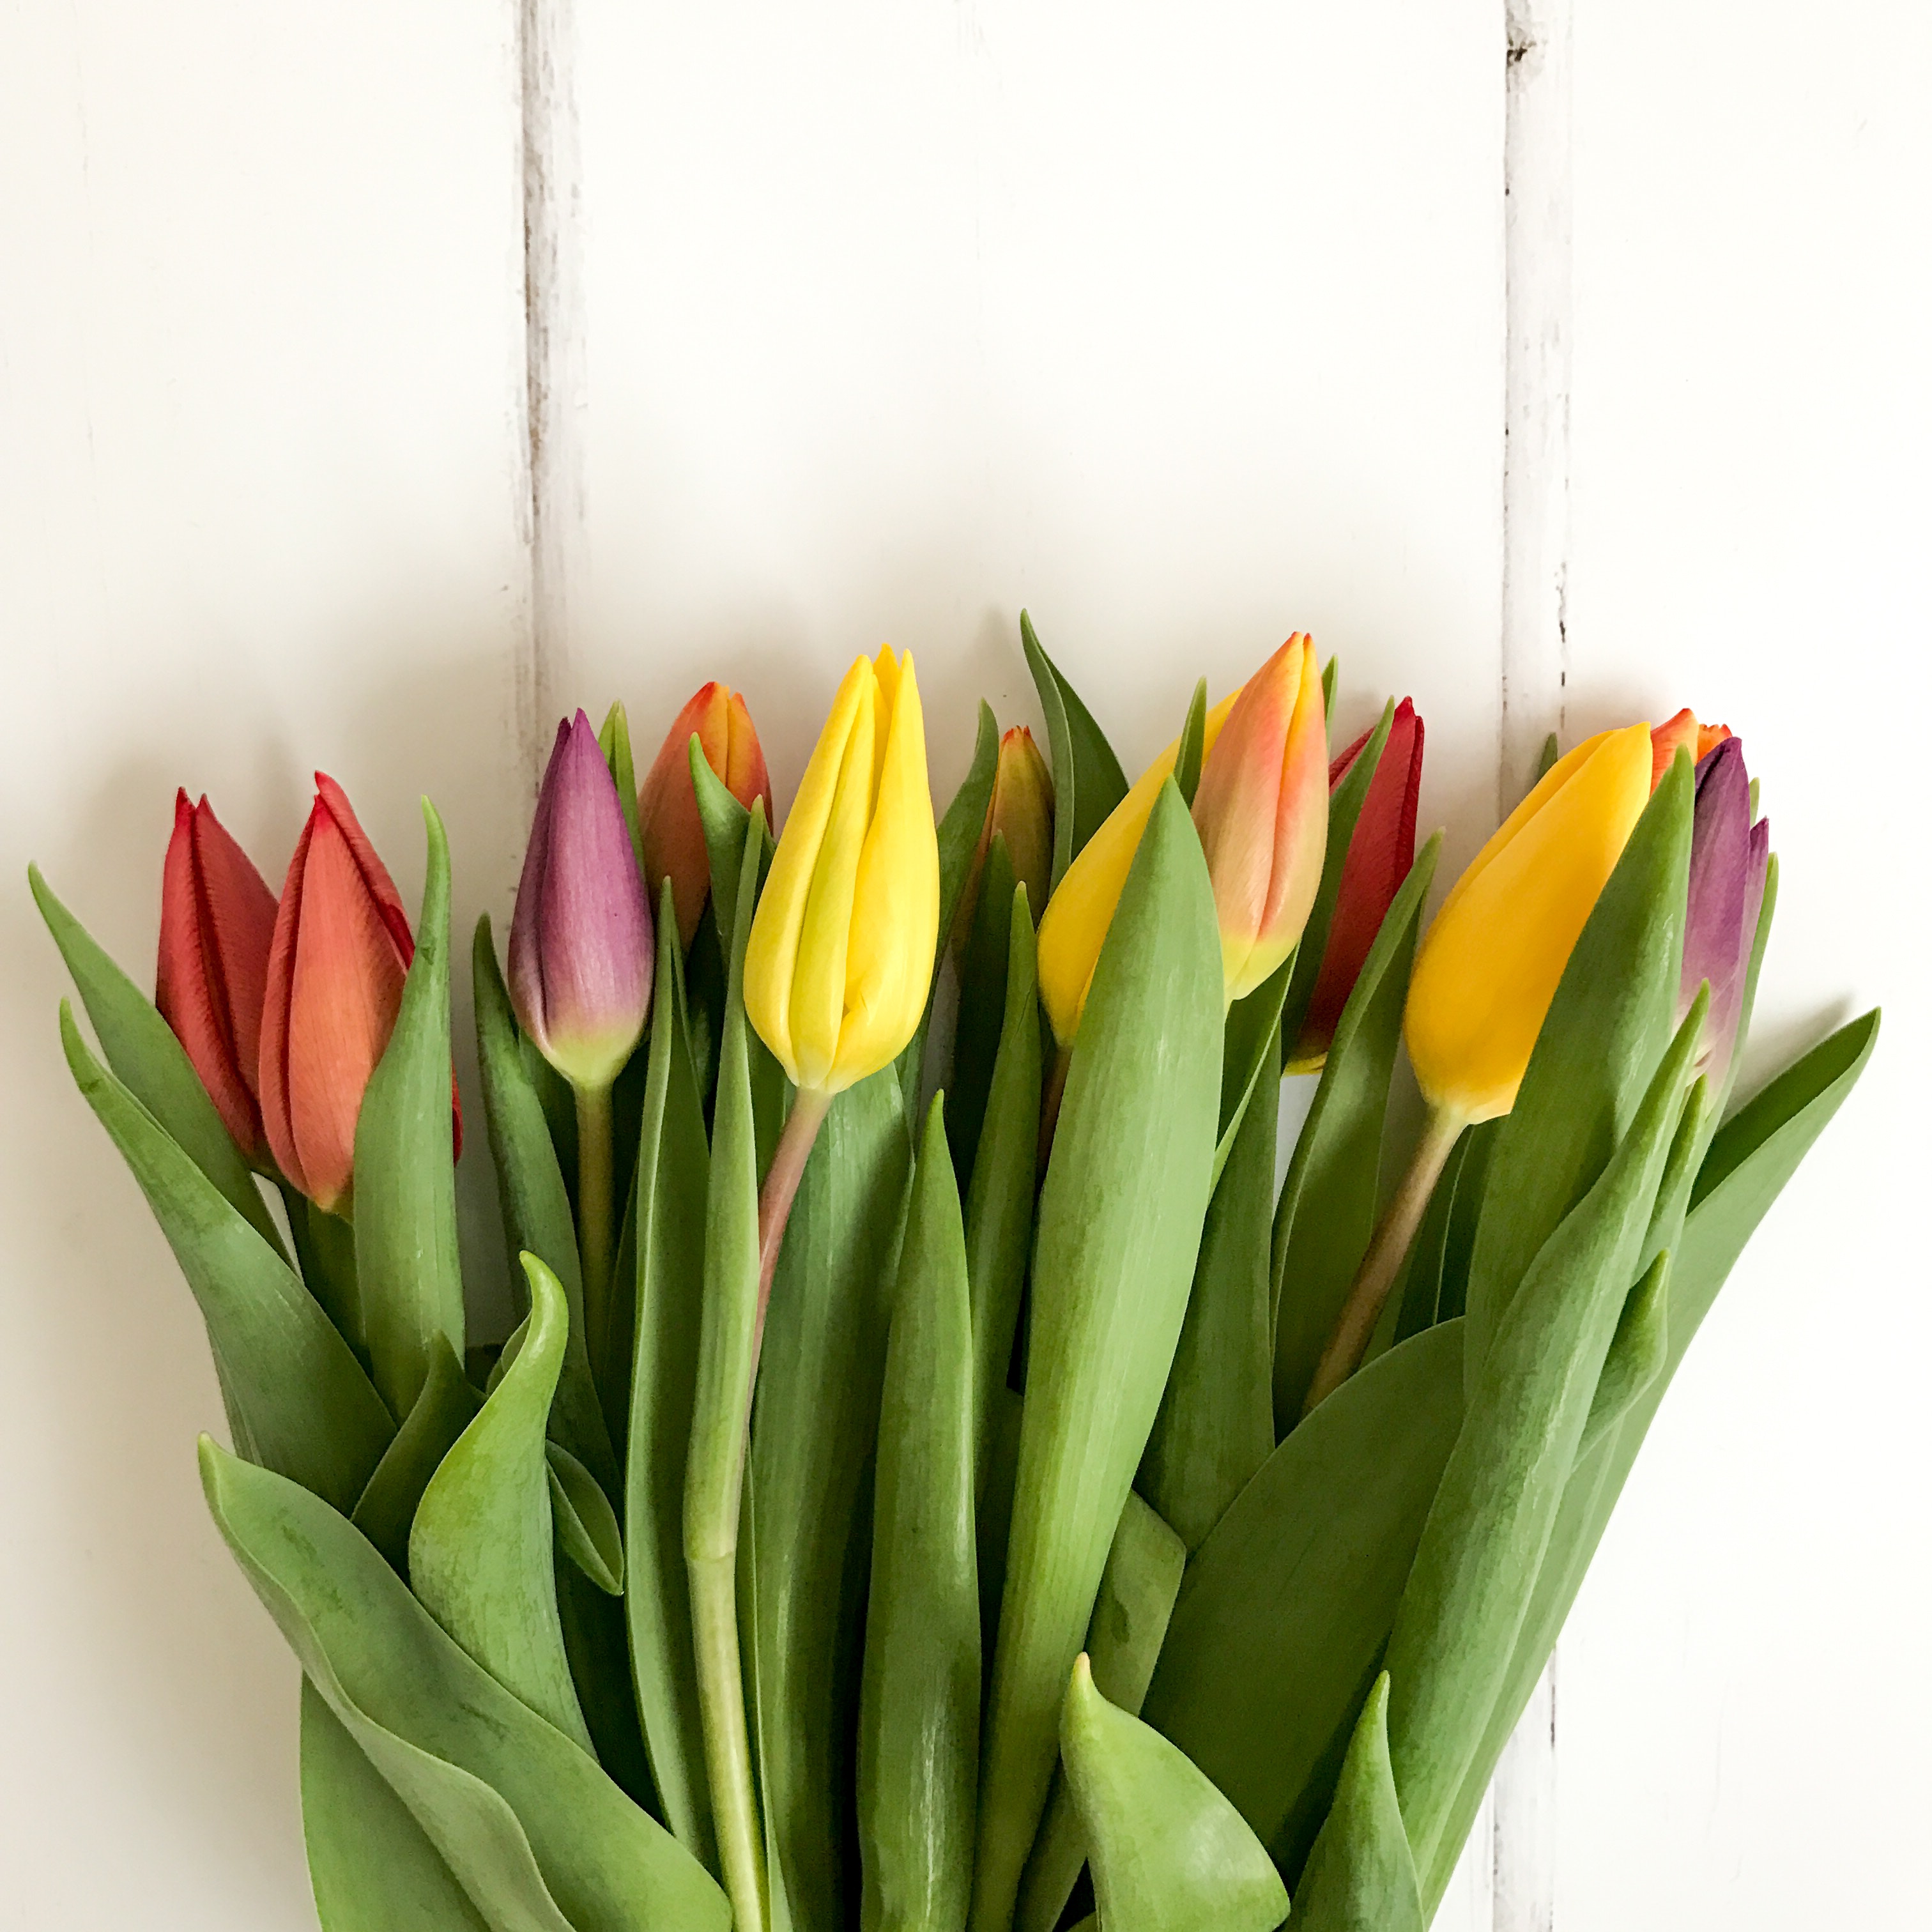 colorful tulips, not yet in full bloom, lying on a white table